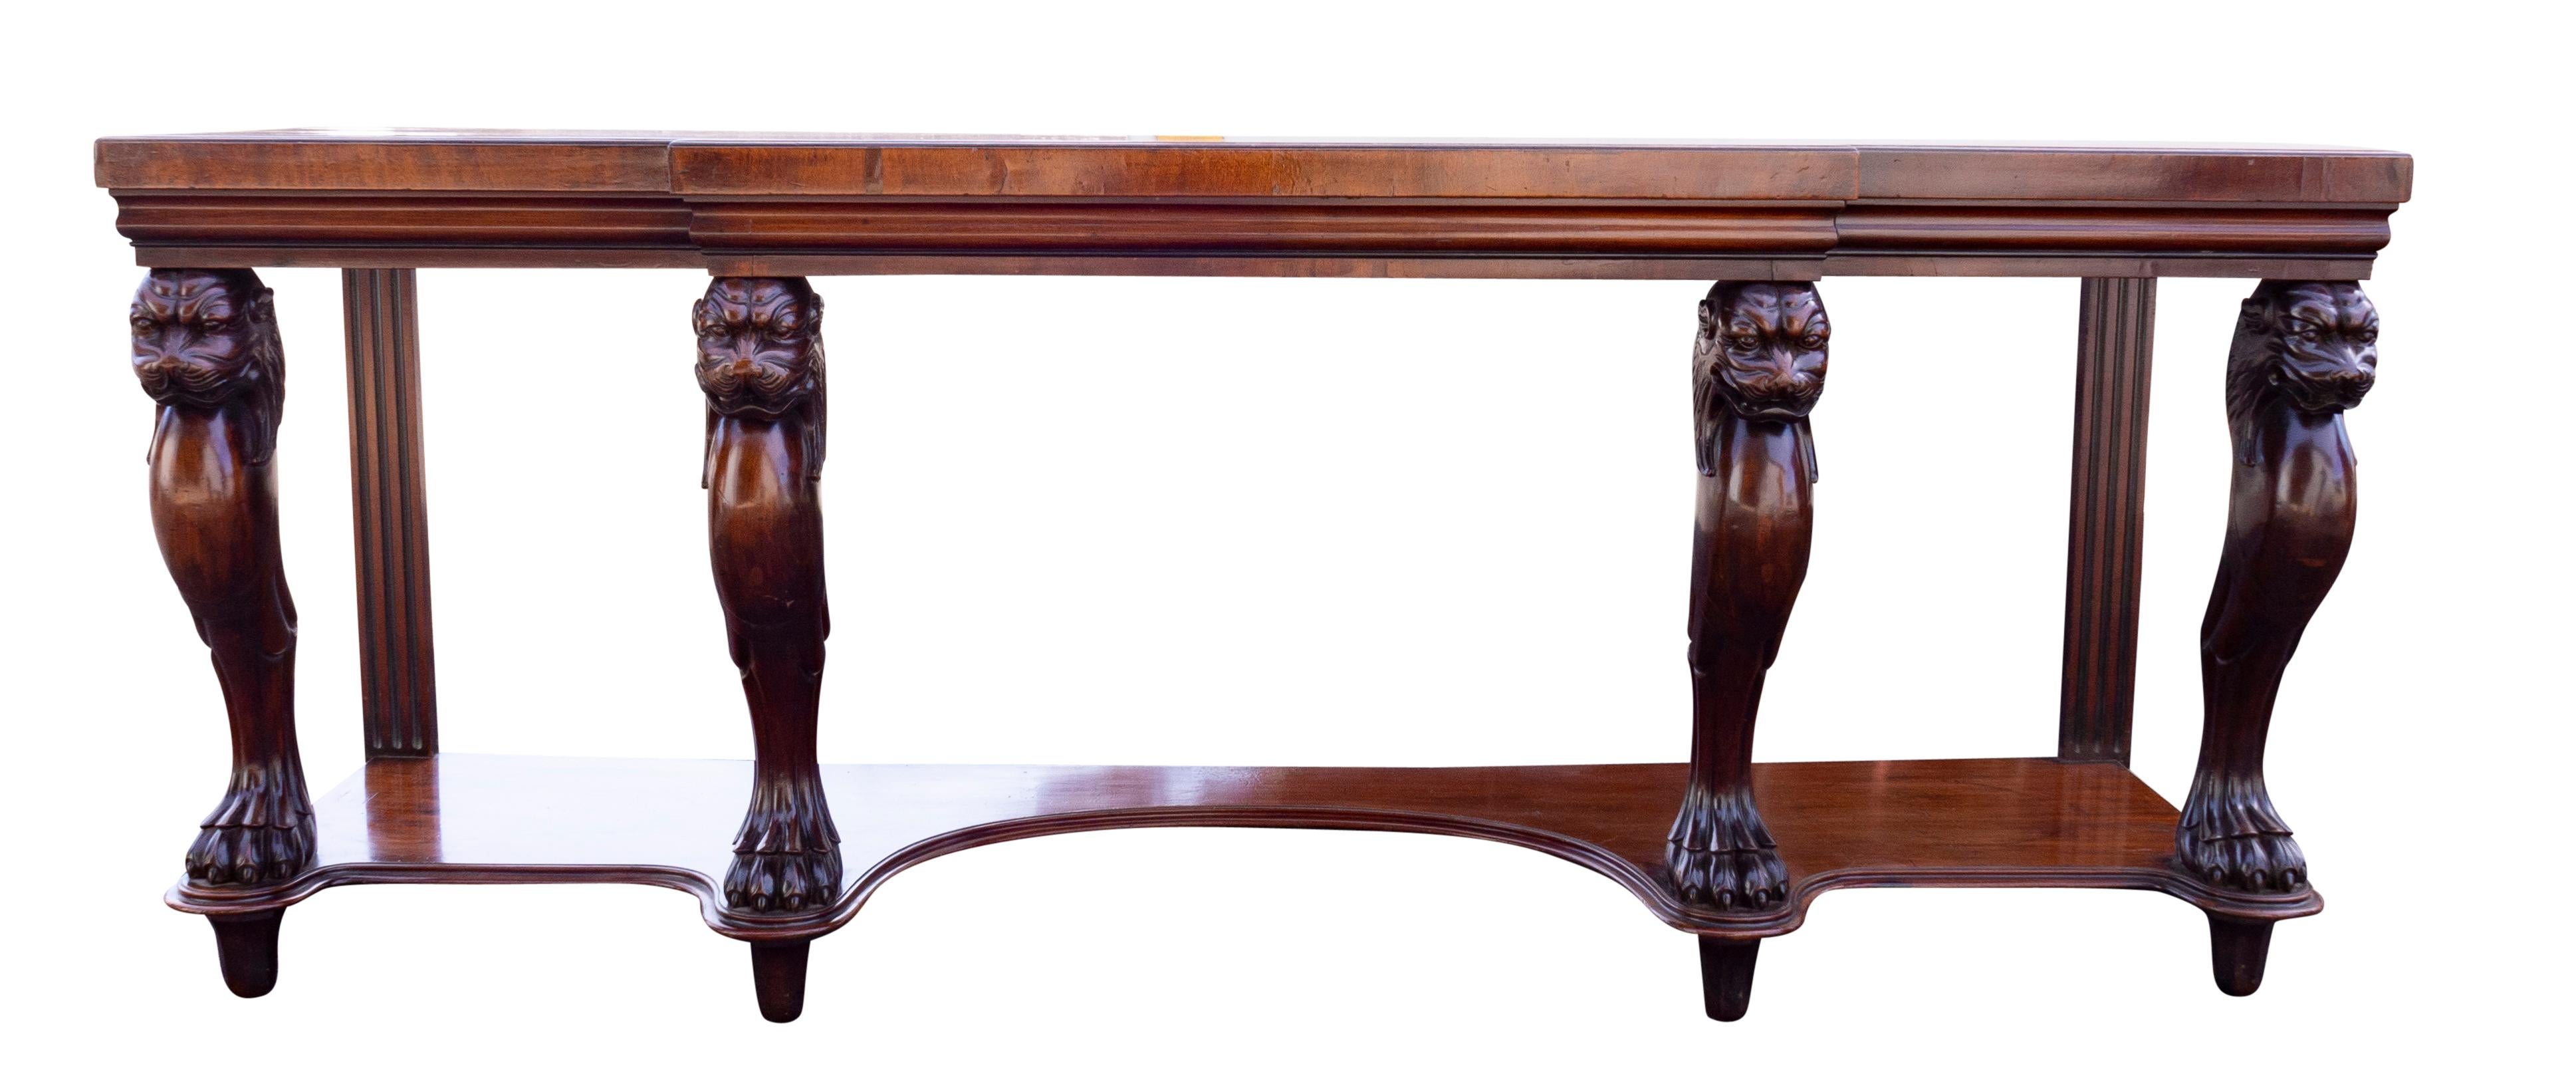 English Regency Mahogany Serving Table For Sale